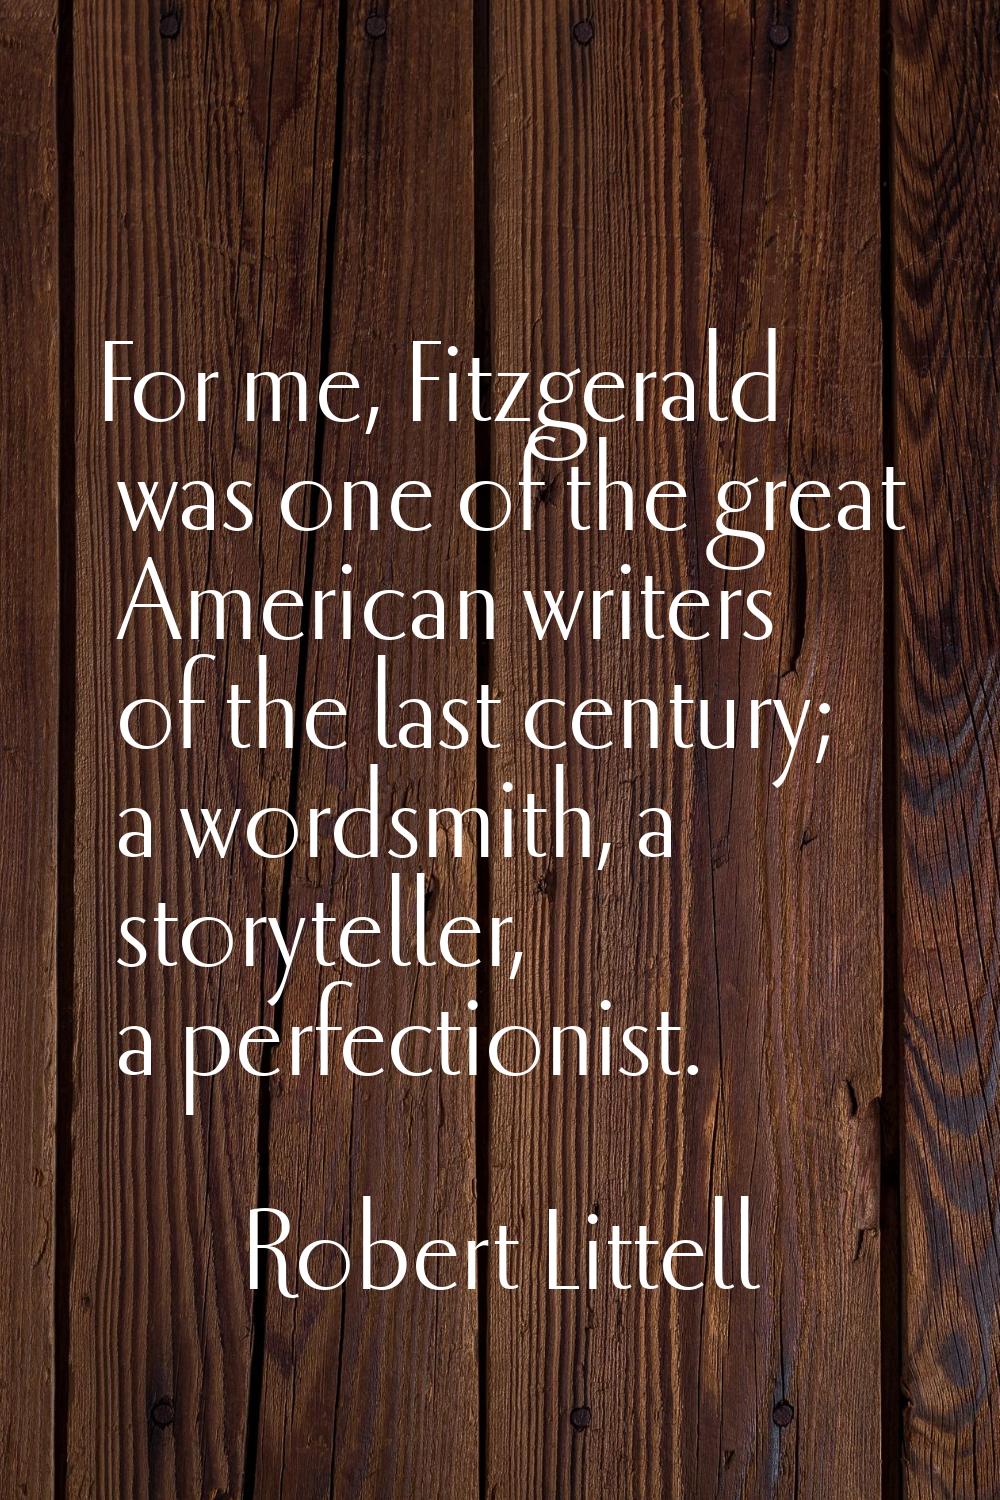 For me, Fitzgerald was one of the great American writers of the last century; a wordsmith, a storyt